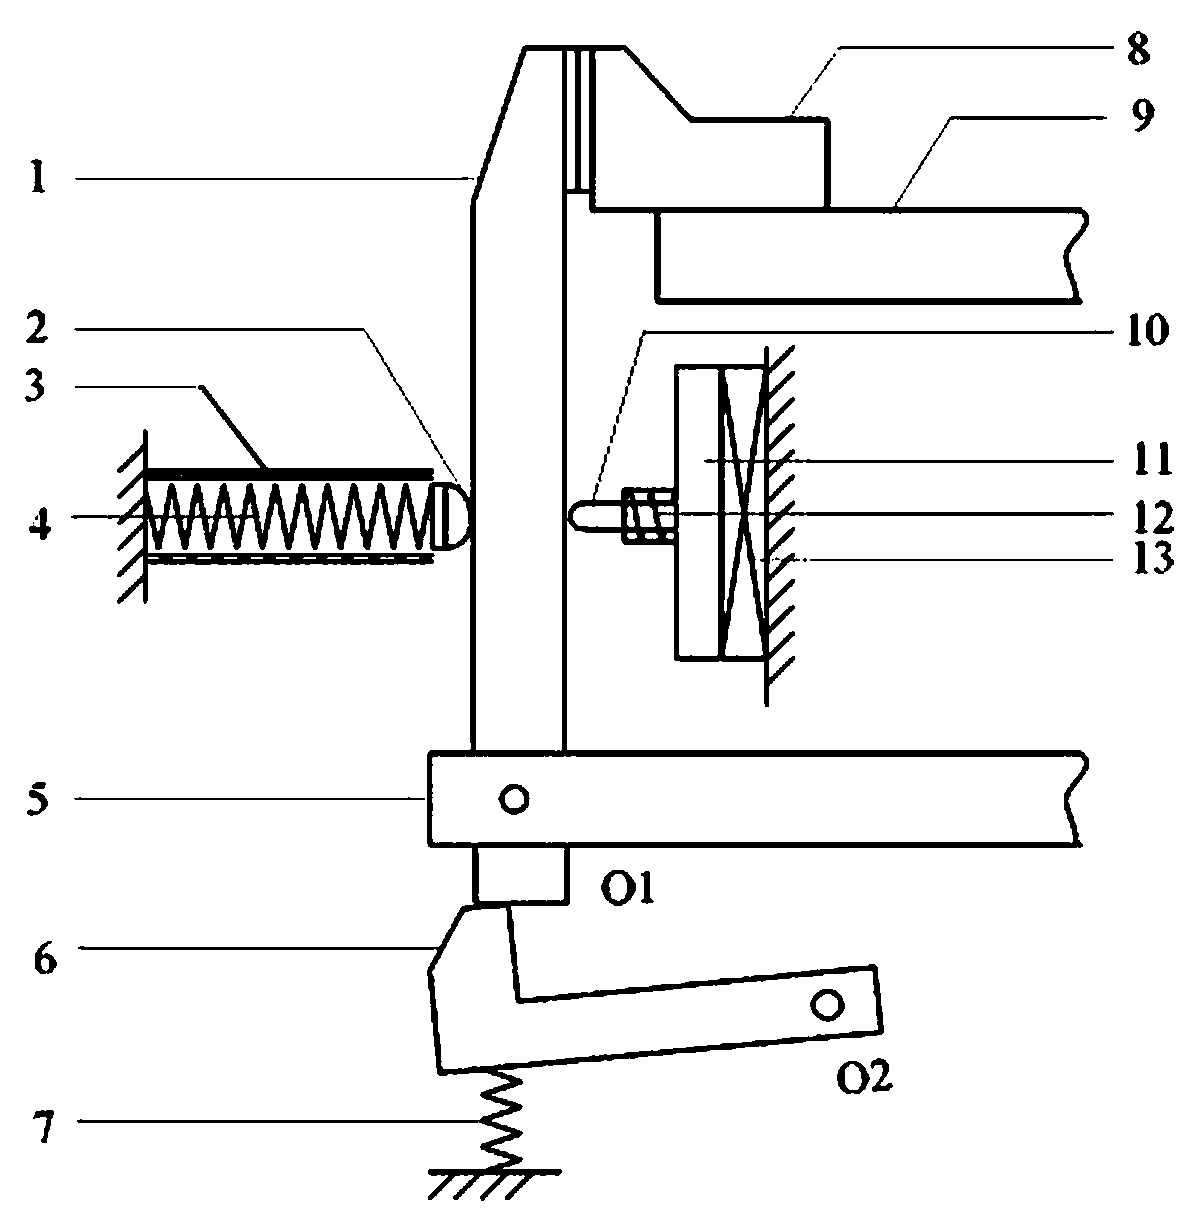 Mechanical switch switching-off action mechanism